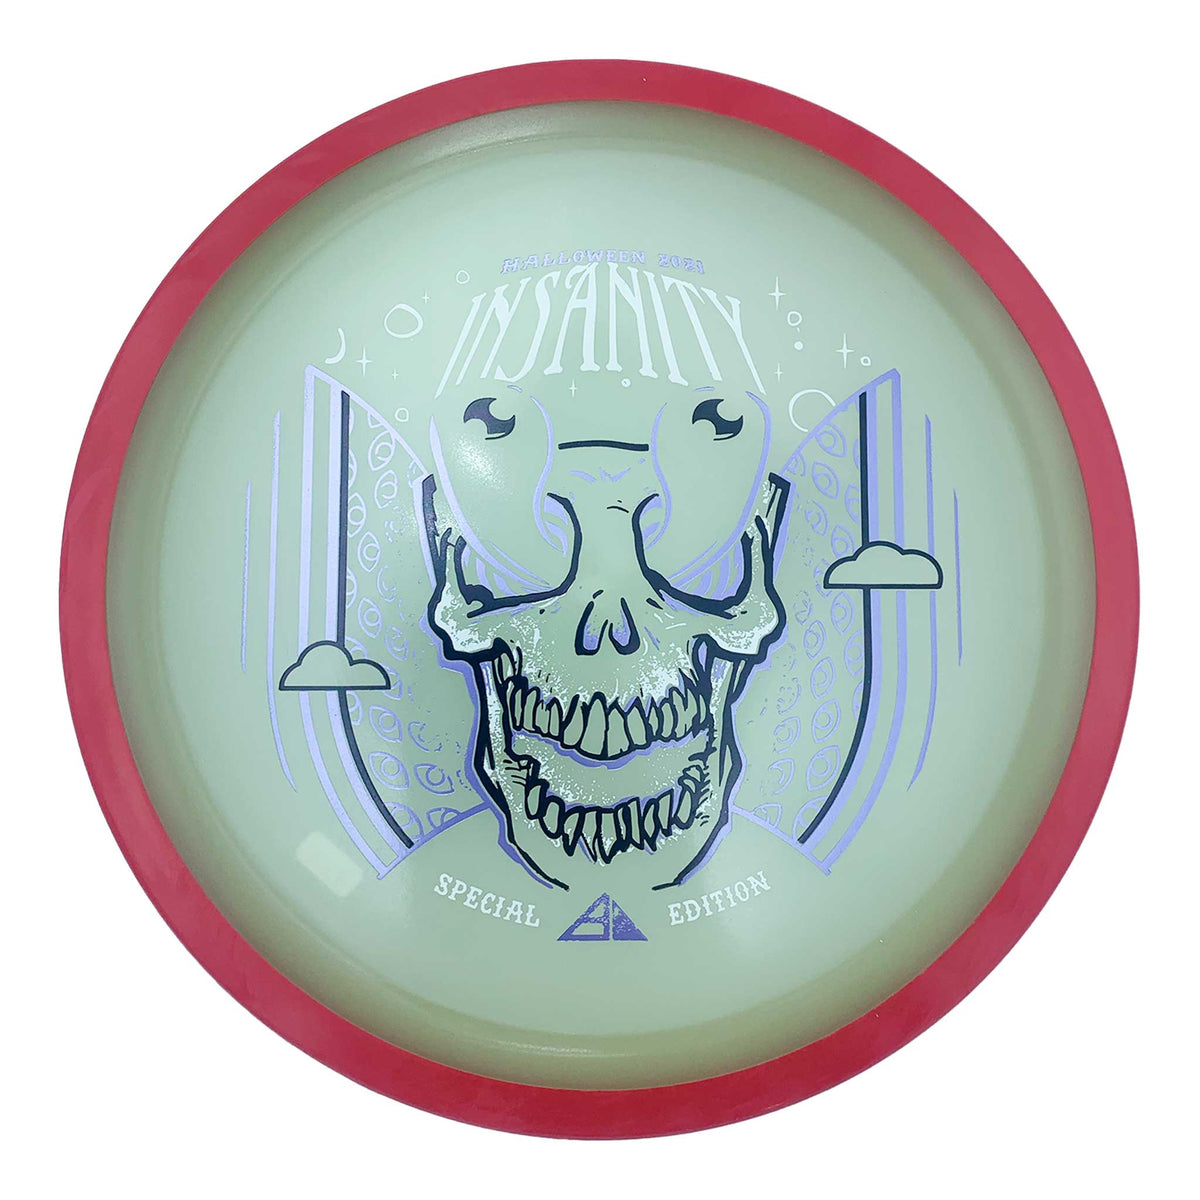 Axiom Discs Eclipse 2.0 Glow Insanity Halloween 2021 Special Edition distance driver - Rouge